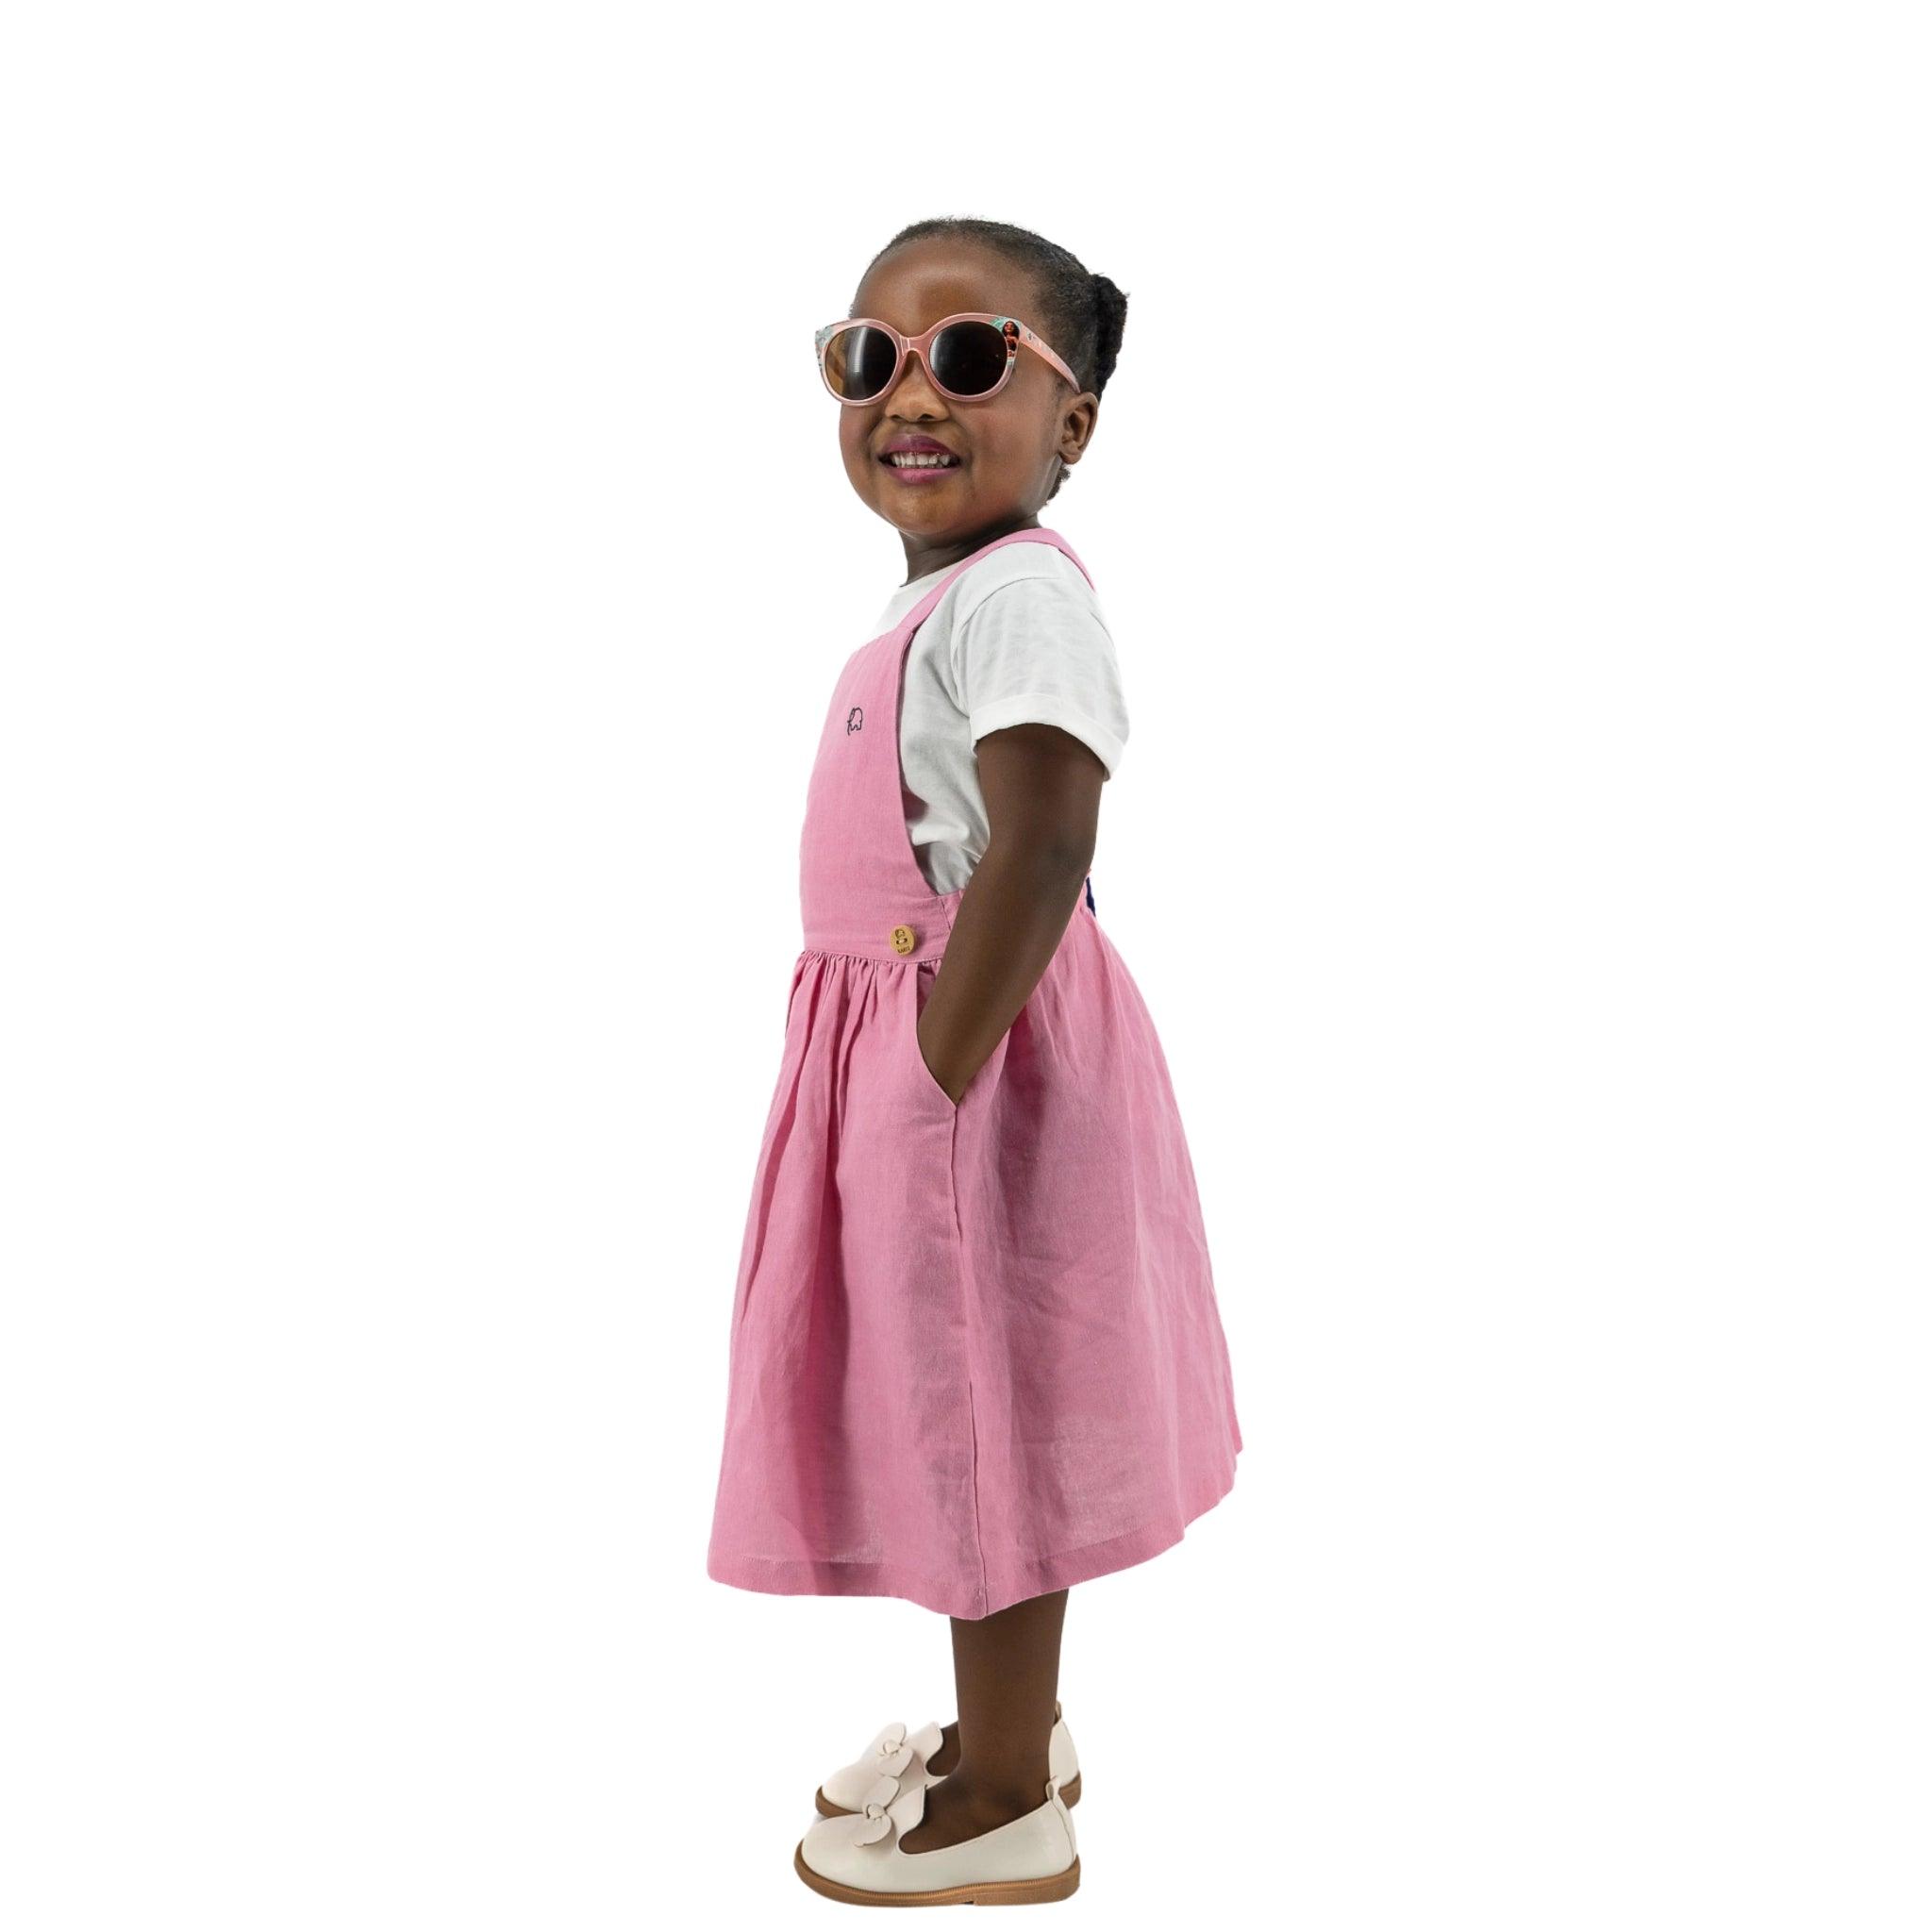 Young girl in a Karee Cashmere Rose Linen Pinafore and sunglasses, standing confidently with hands on hips, isolated on a white background.